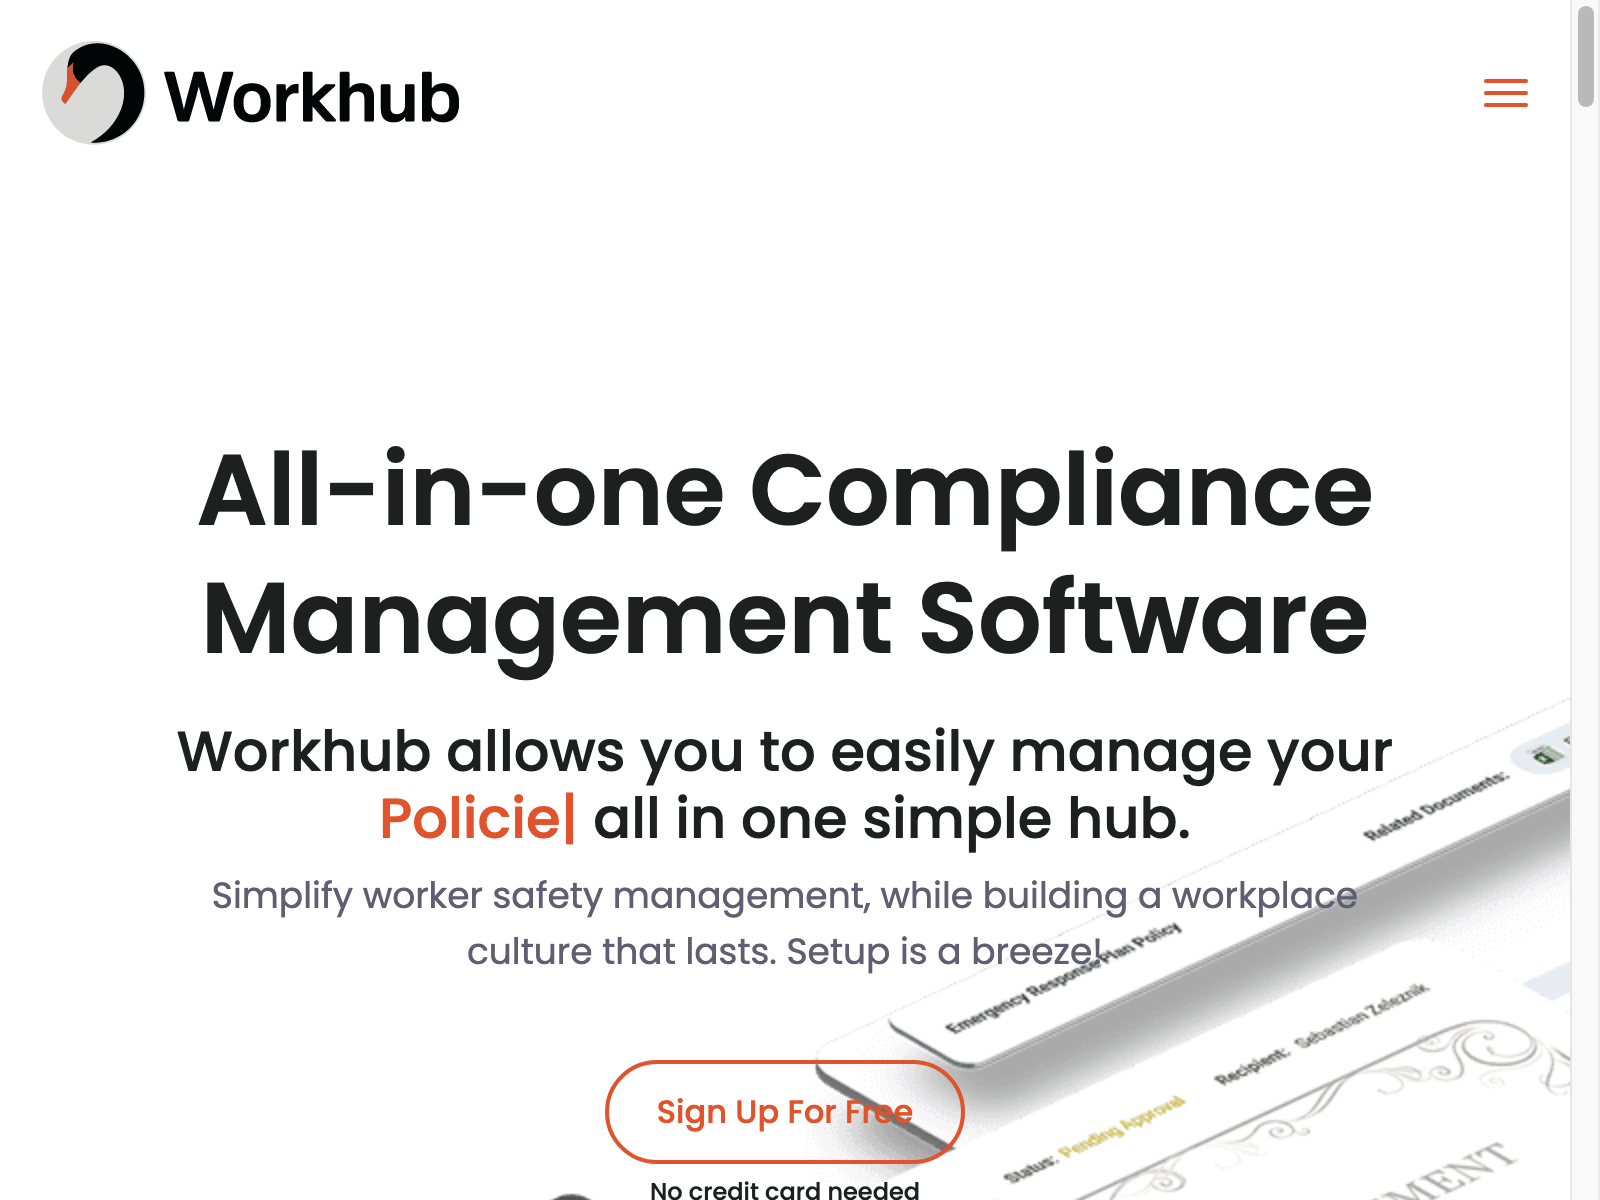 workhub Review: Pros, Cons, Alternatives